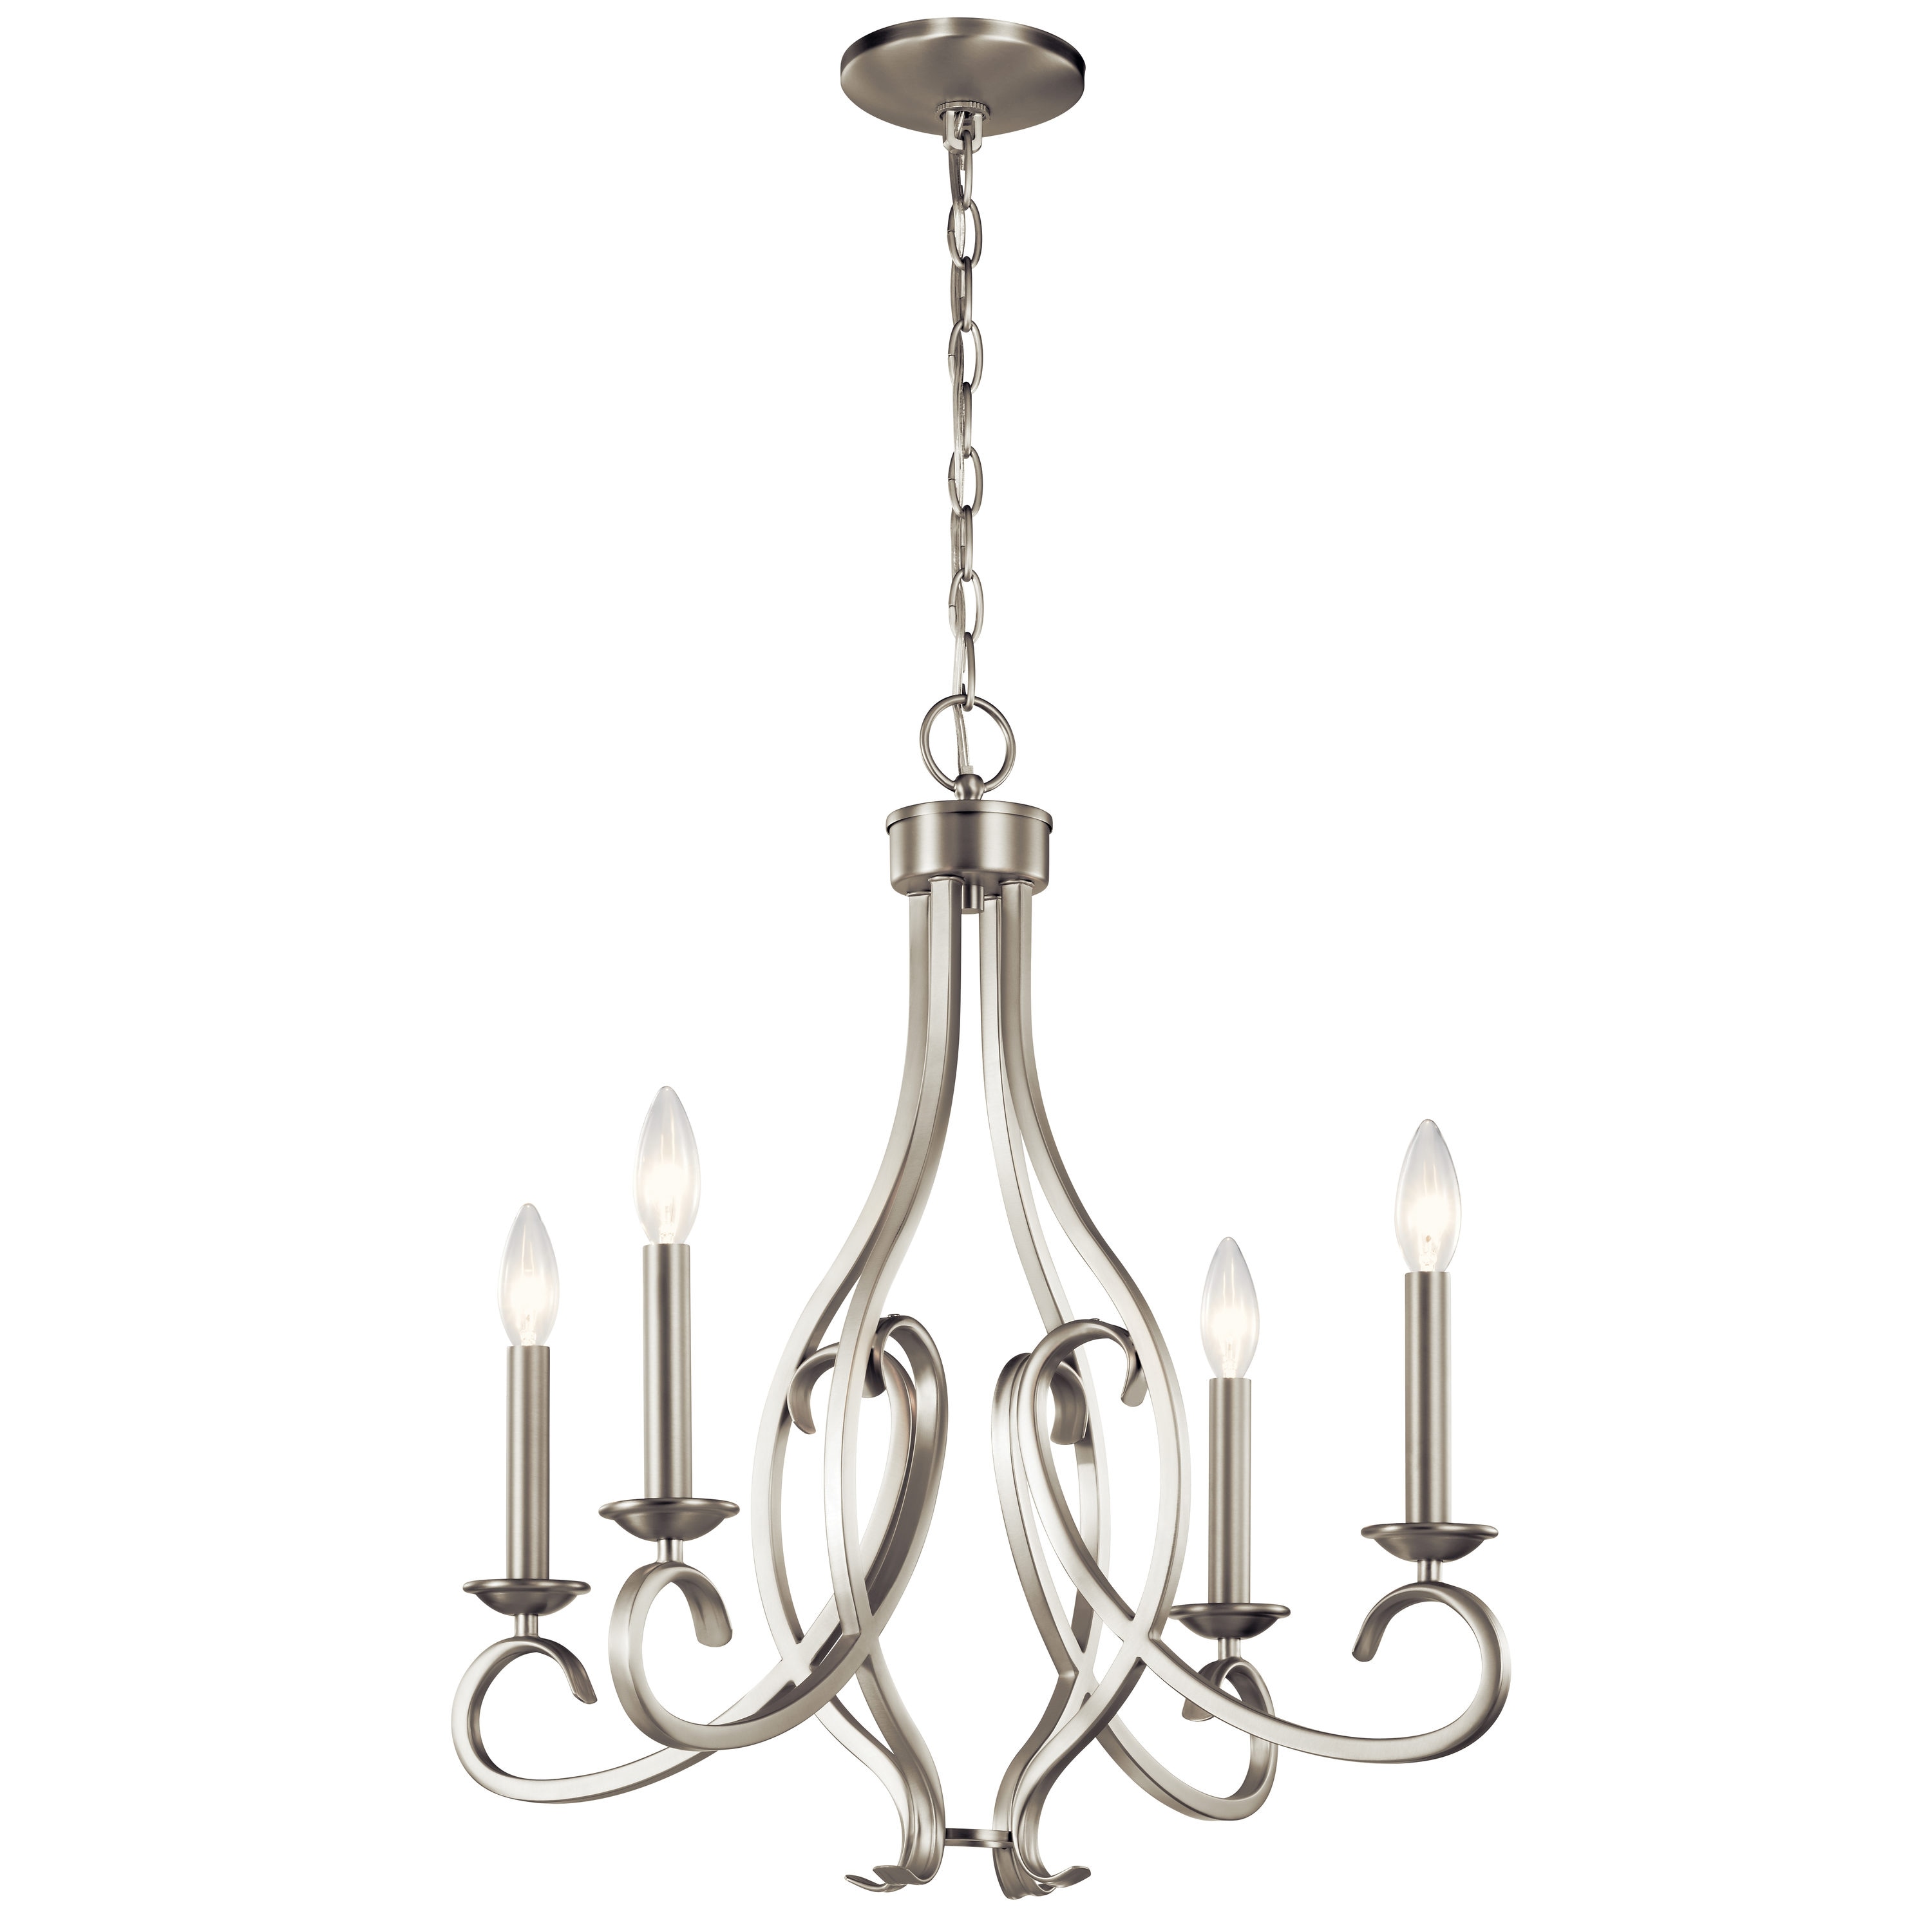 Kichler Ania 4-Light Brushed Nickel Traditional Dry rated Chandelier in ...